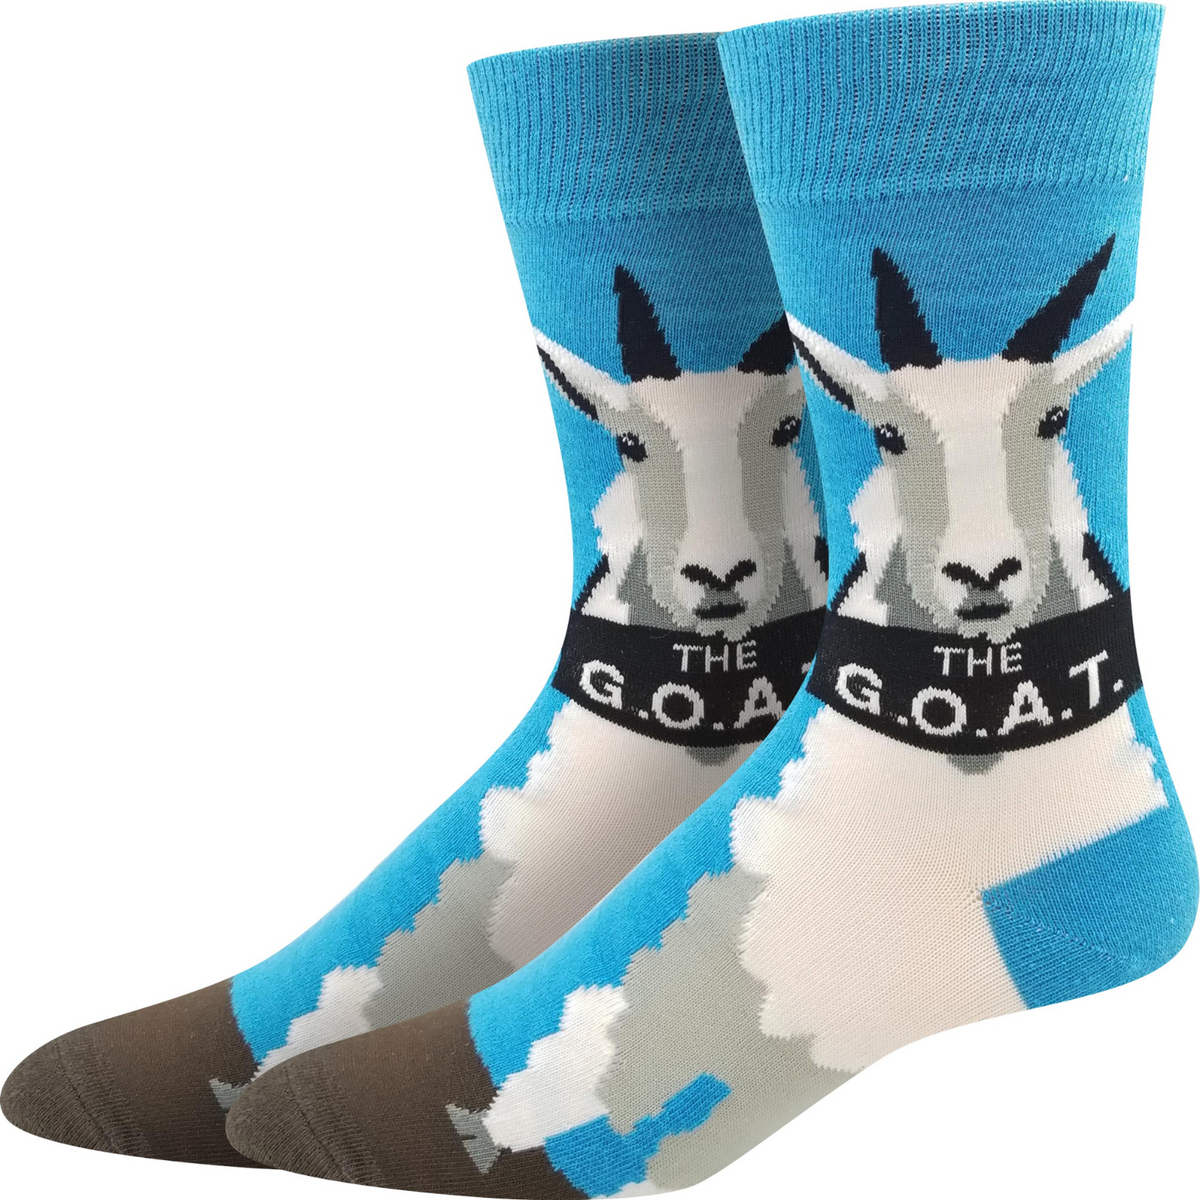 Sock Harbor Mountain G.O.A.T. men&#39;s sock featuring blue sock with white mountain goat and &quot;The G.O.A.T.&quot; written on it shown on display feet